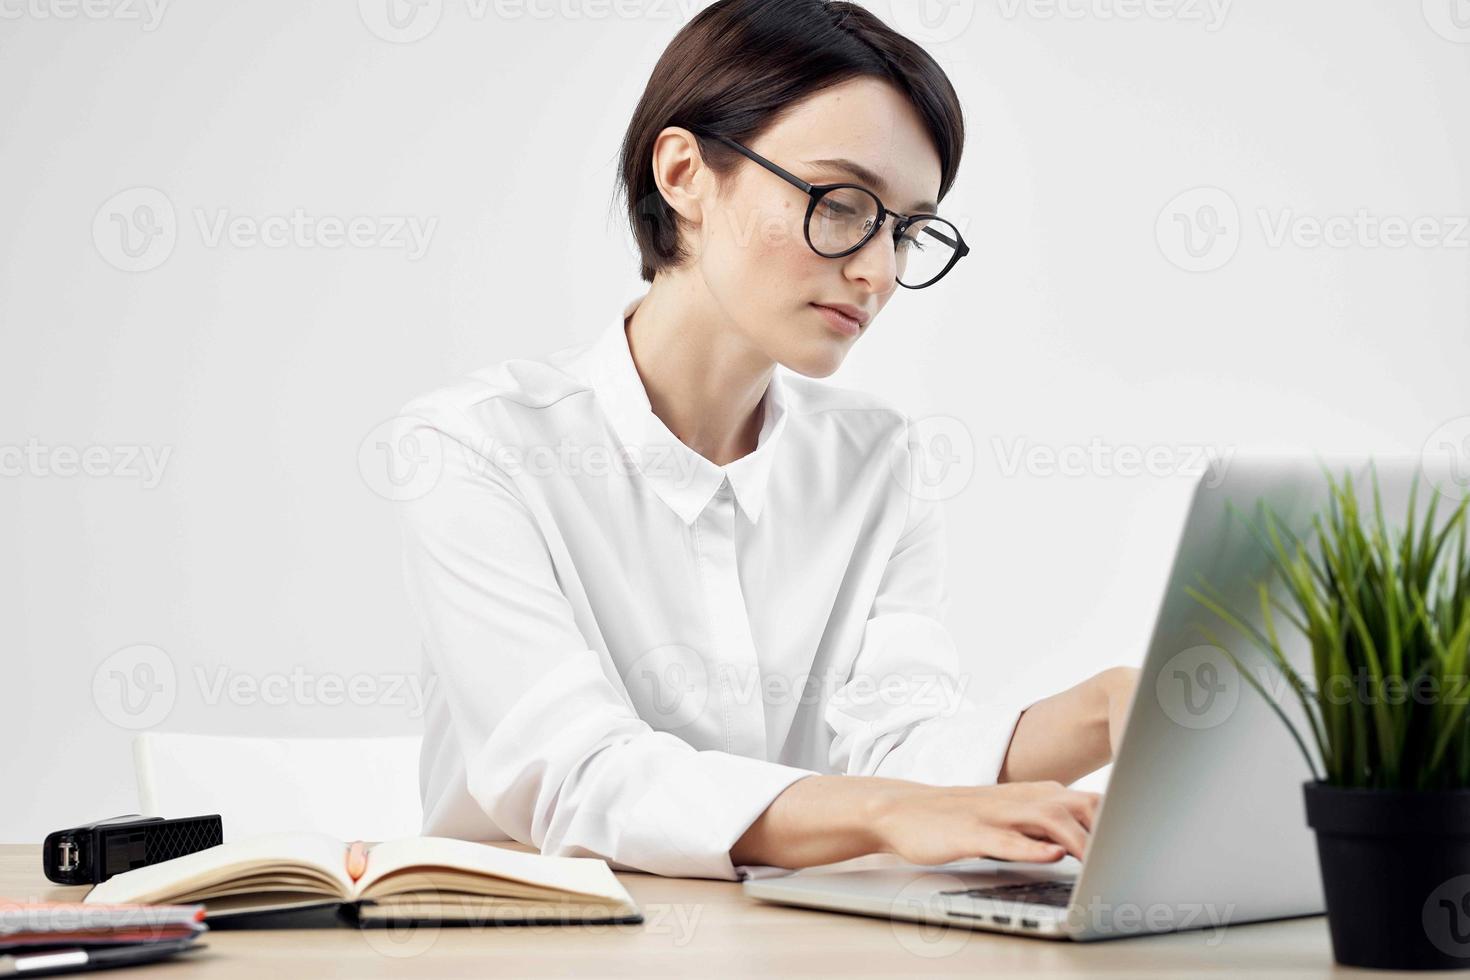 woman in costume in front of laptop documents Professional Job light background photo